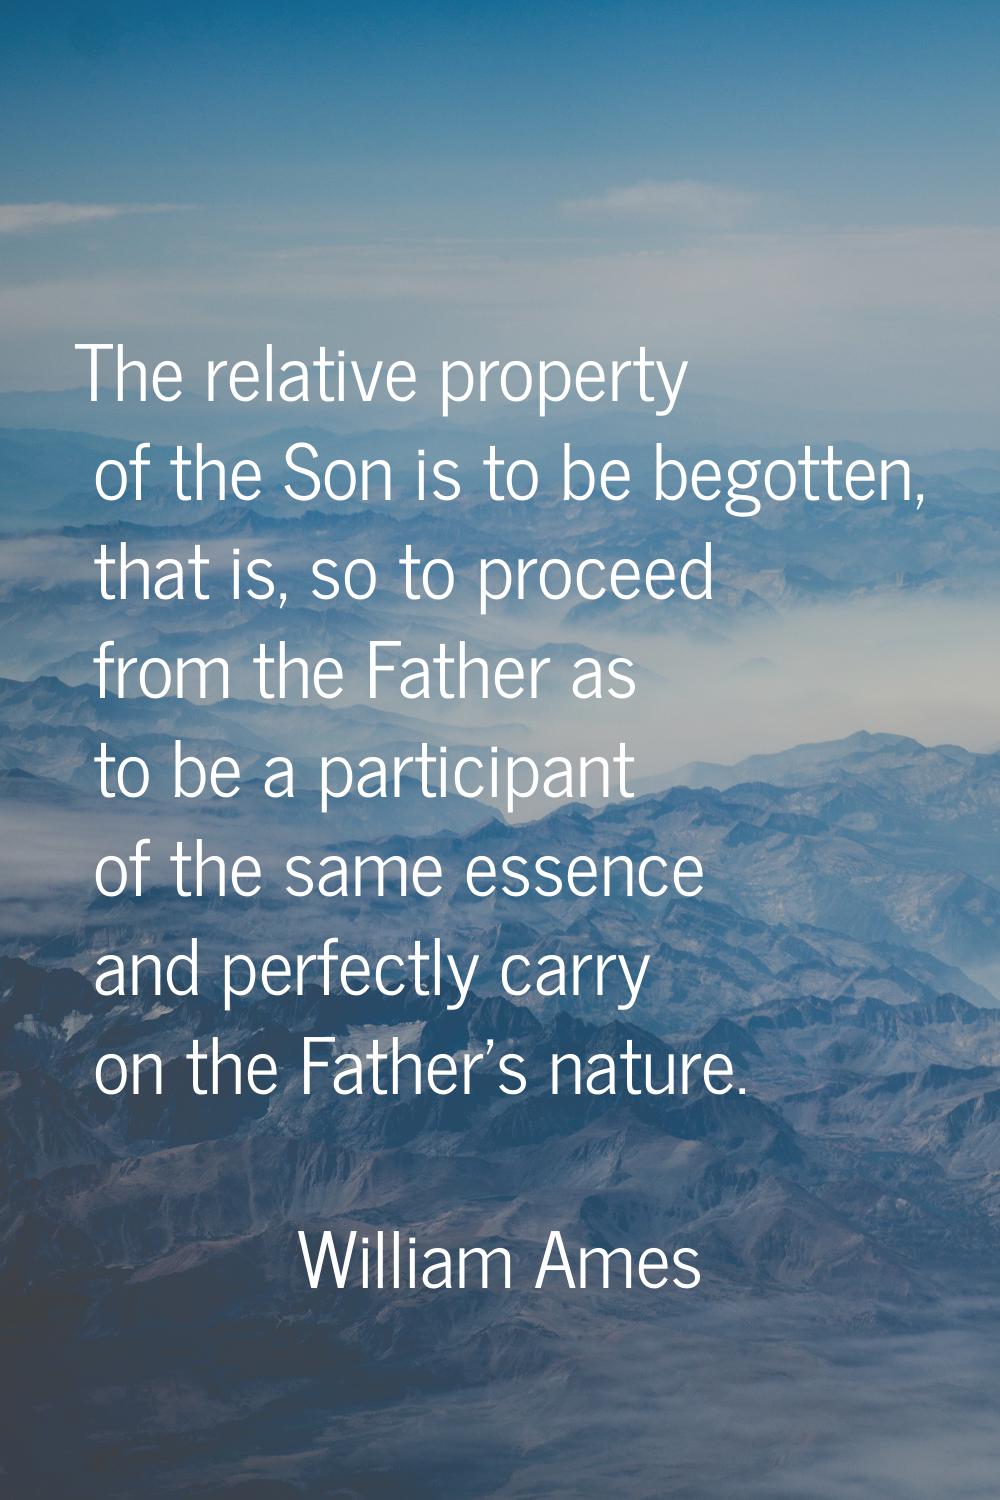 The relative property of the Son is to be begotten, that is, so to proceed from the Father as to be